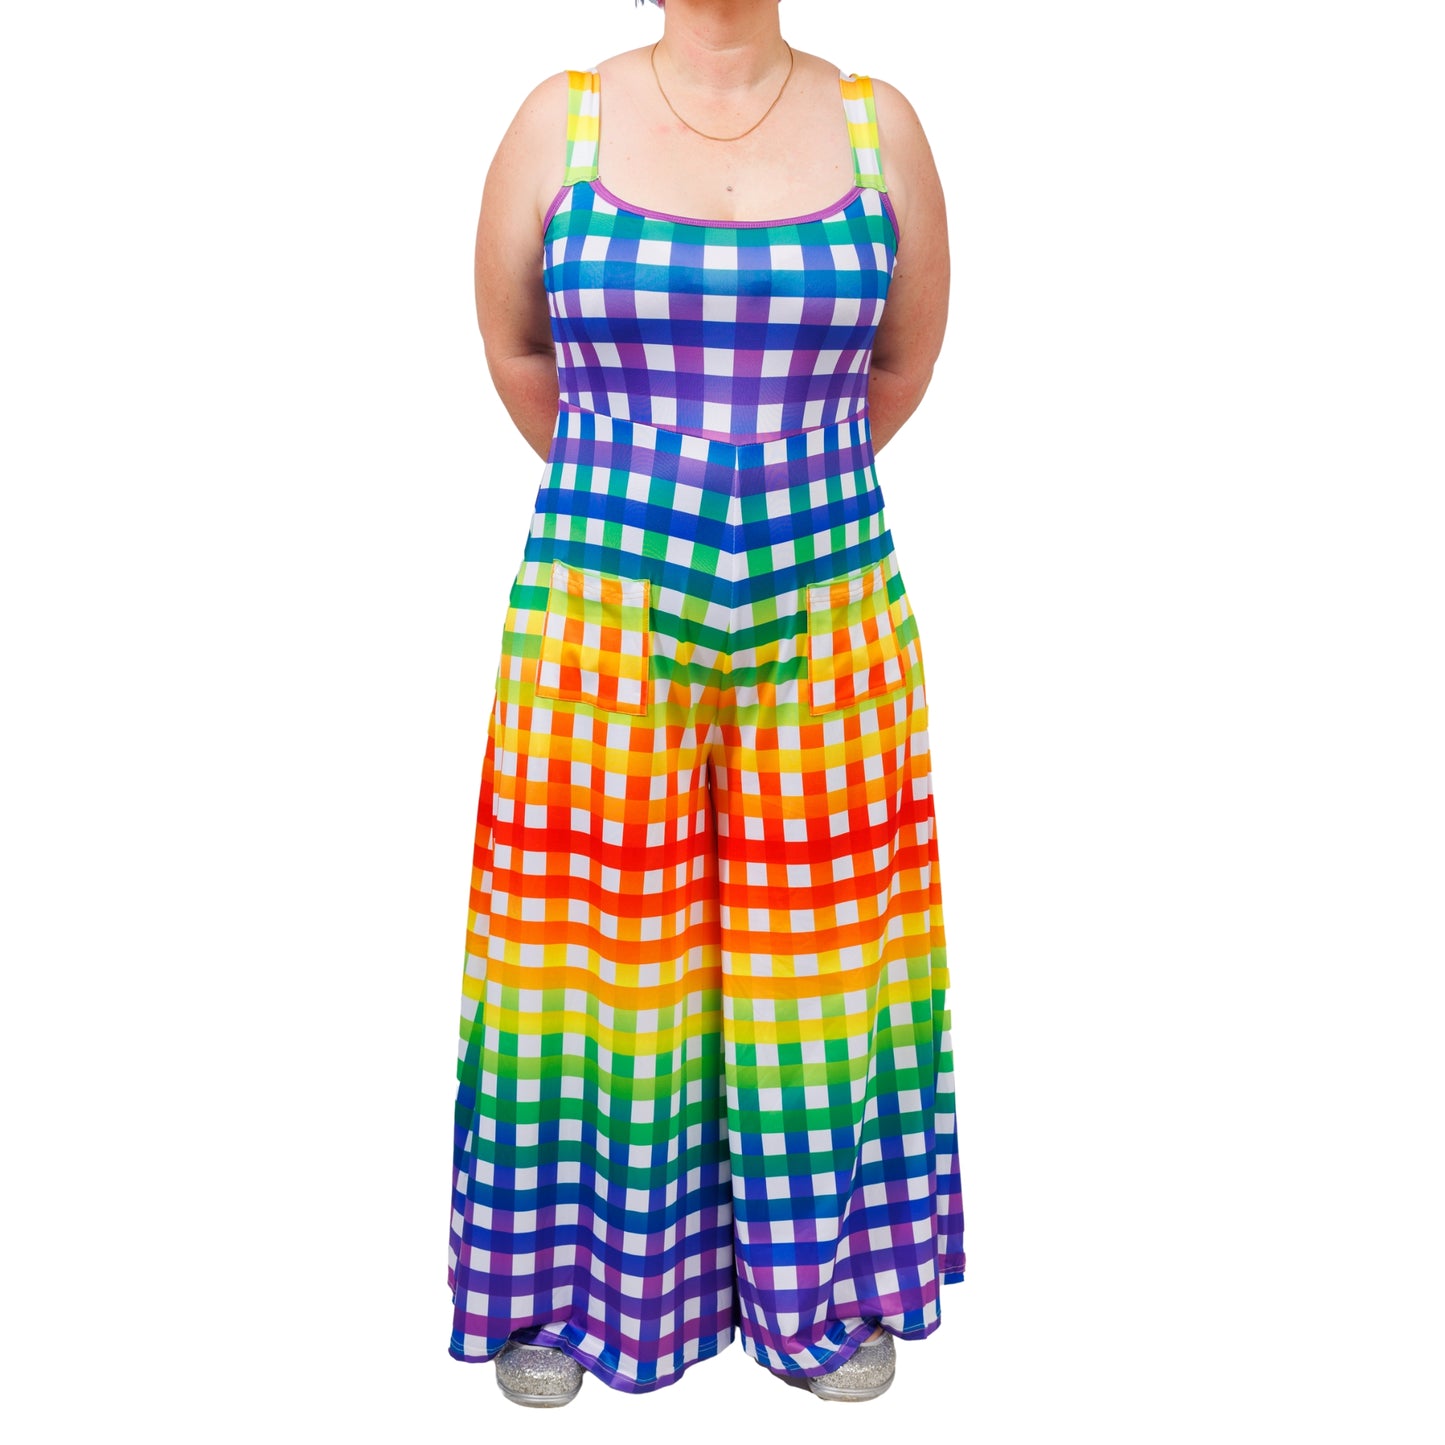 Rainbow Gingham Jumpsuit by RainbowsAndFairies.com.au (Check - Pride - Overalls - Wide Leg Pants - Kitsch - Rockabilly) - SKU: CL_JUMPS_GINGH_RBW - Pic-01